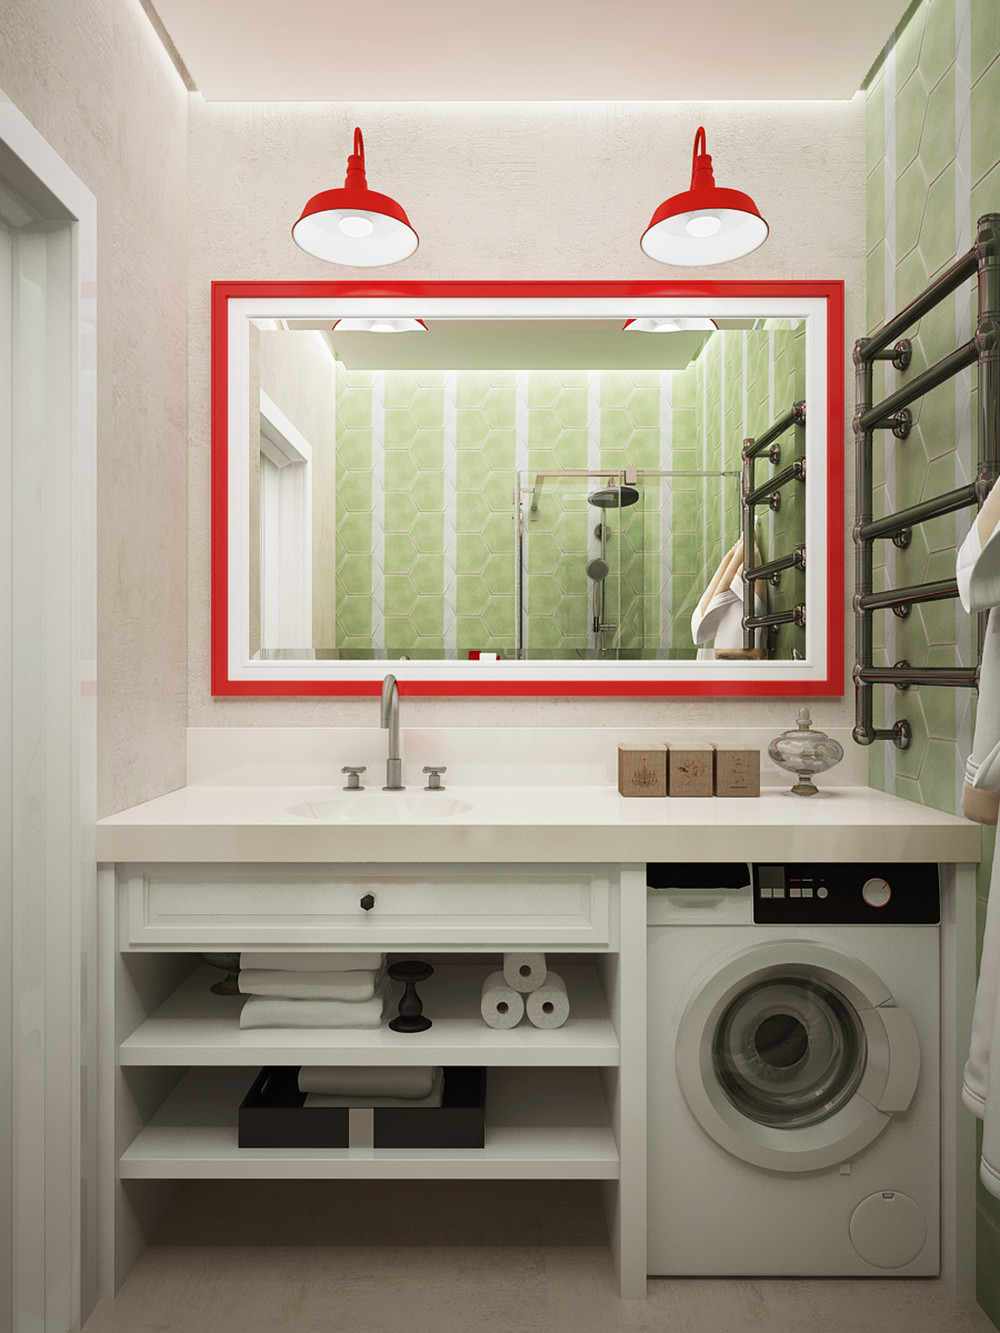 http://cdn.home-designing.com/wp-content/uploads/2016/02/red-and-green-small-bathroom-theme.jpg